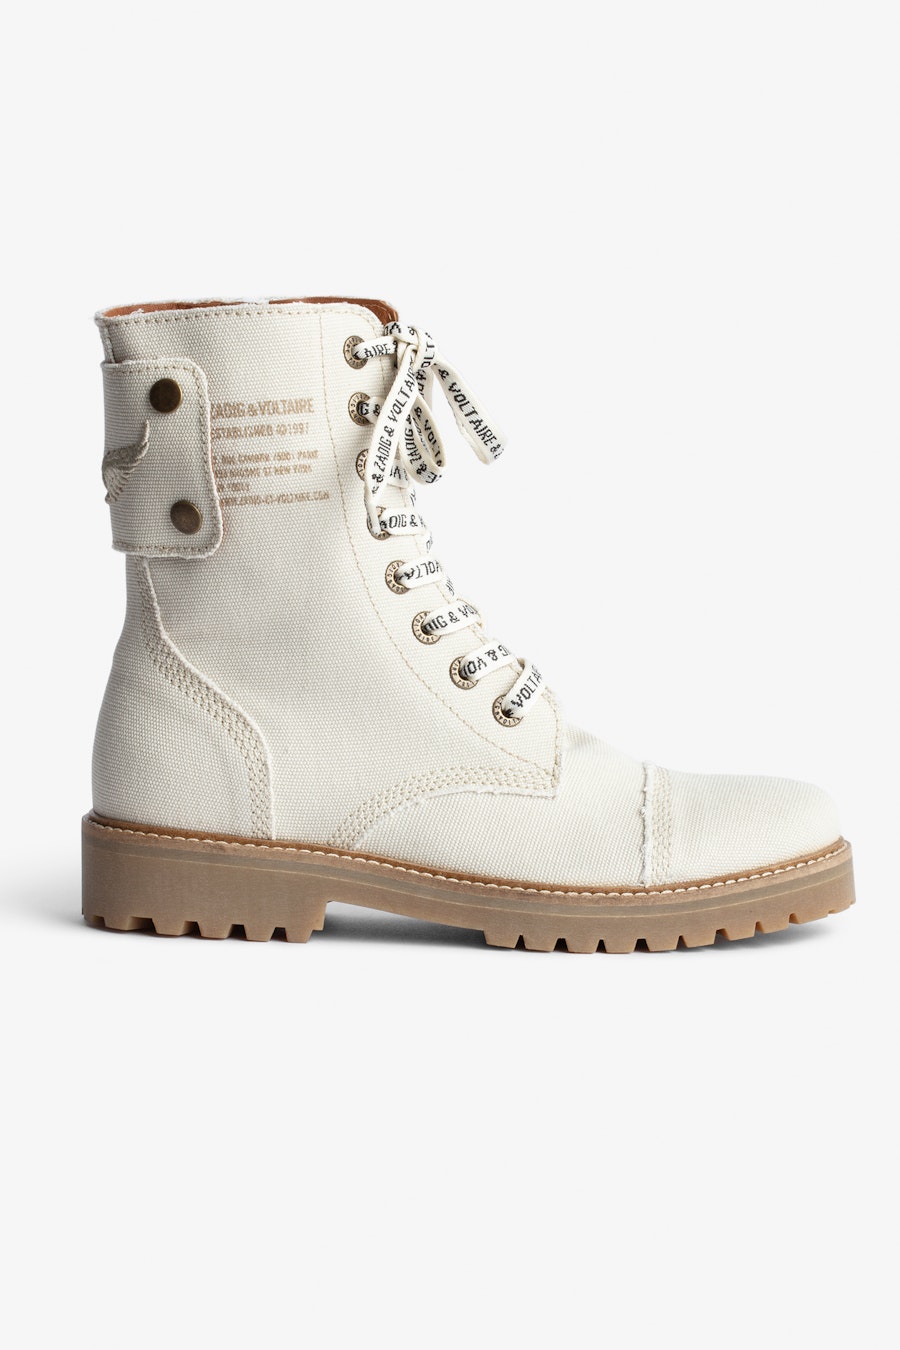 ZADIG&VOLTAIRE Joe Canvas Ankle Boots